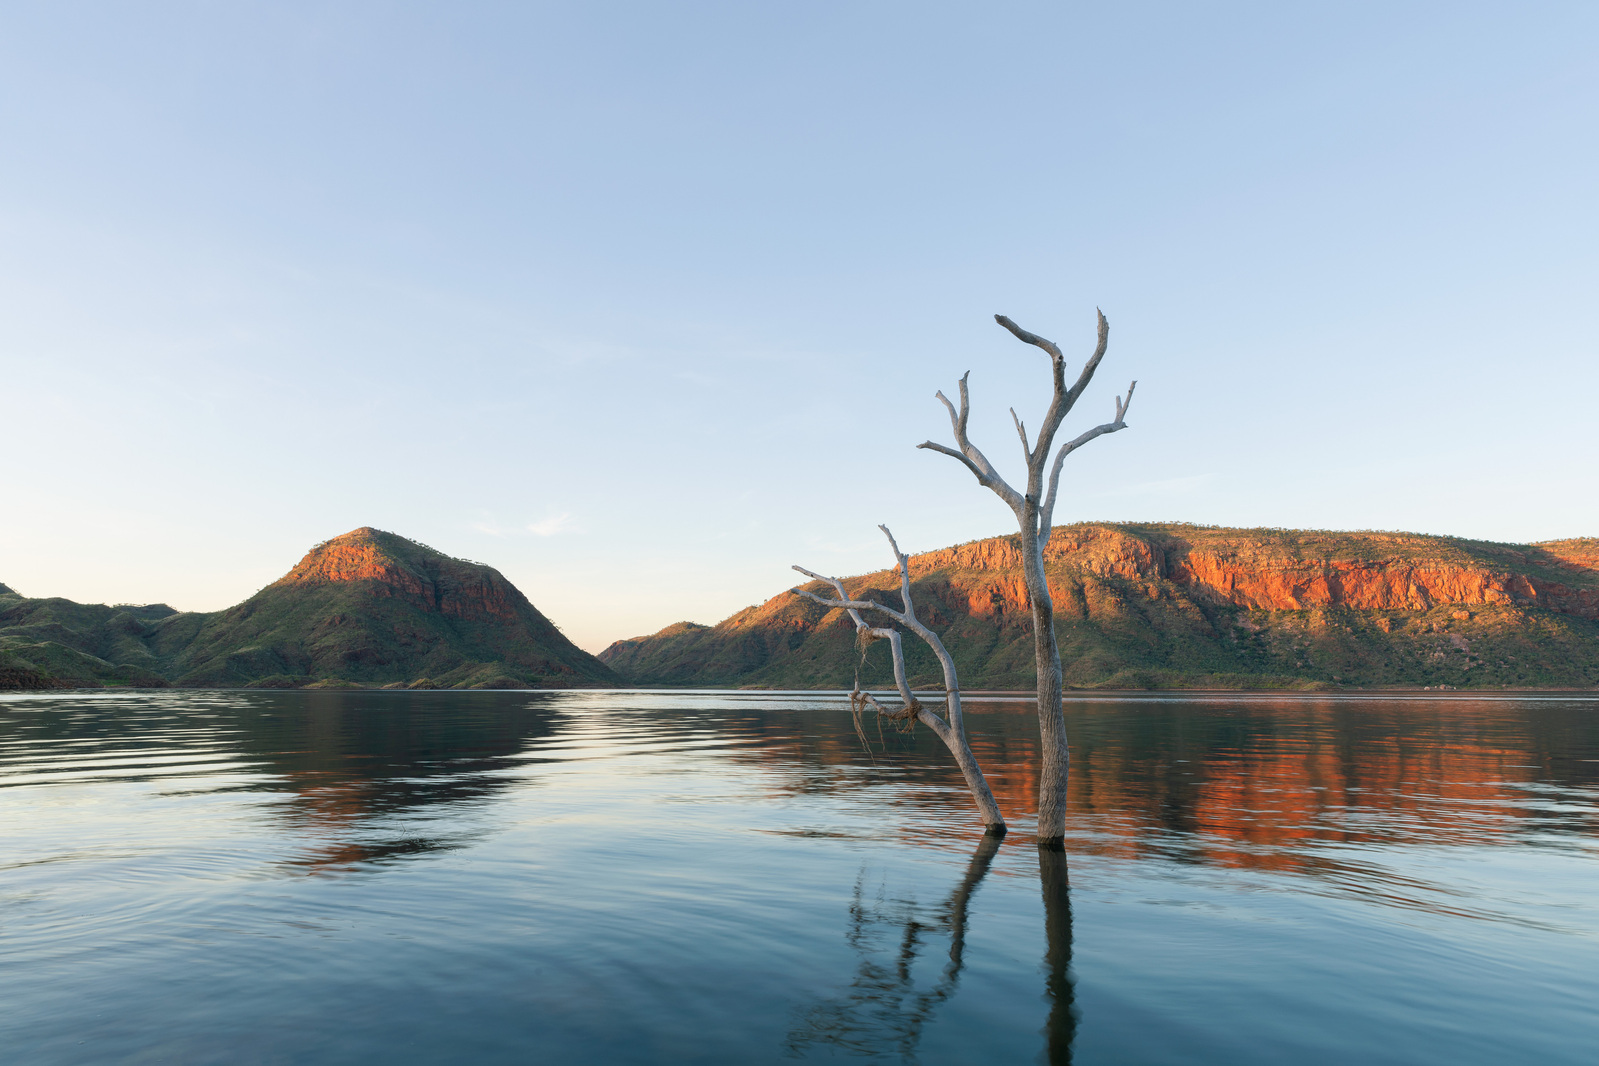 Late afternoon reflections on Lake Argyle.